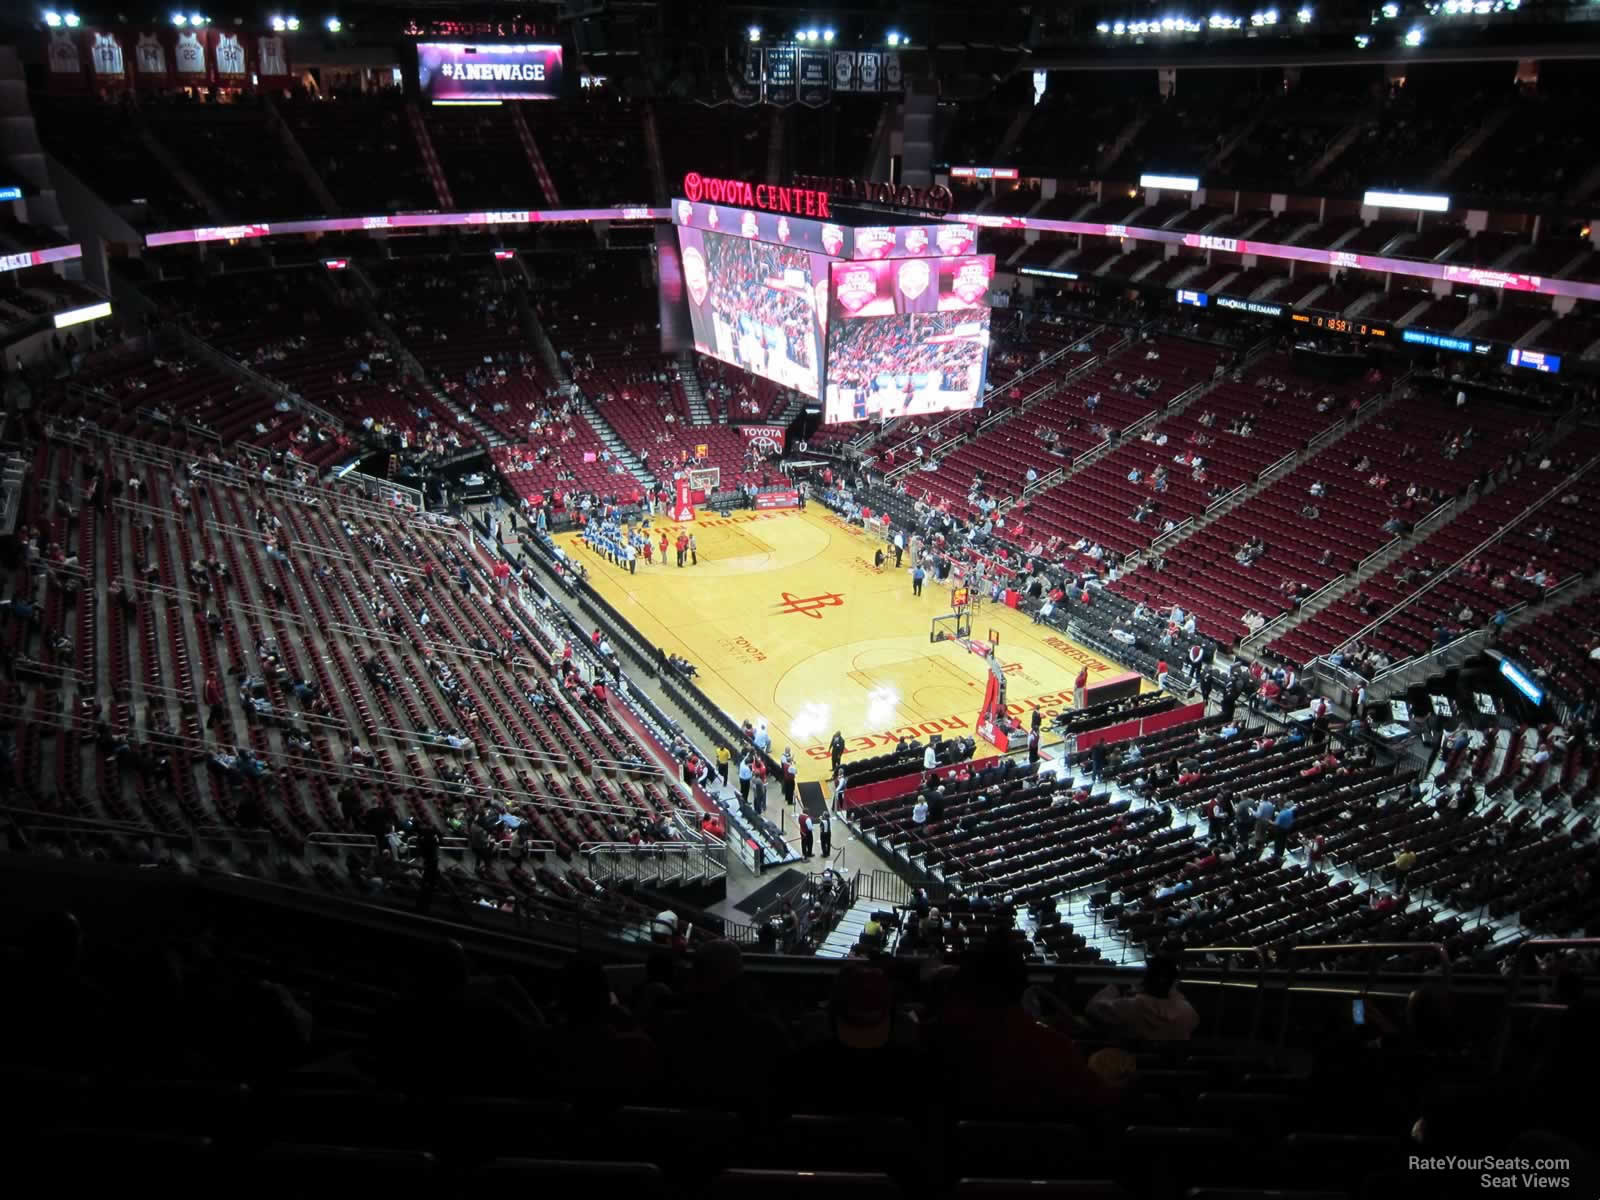 section 403, row 13 seat view  for basketball - toyota center